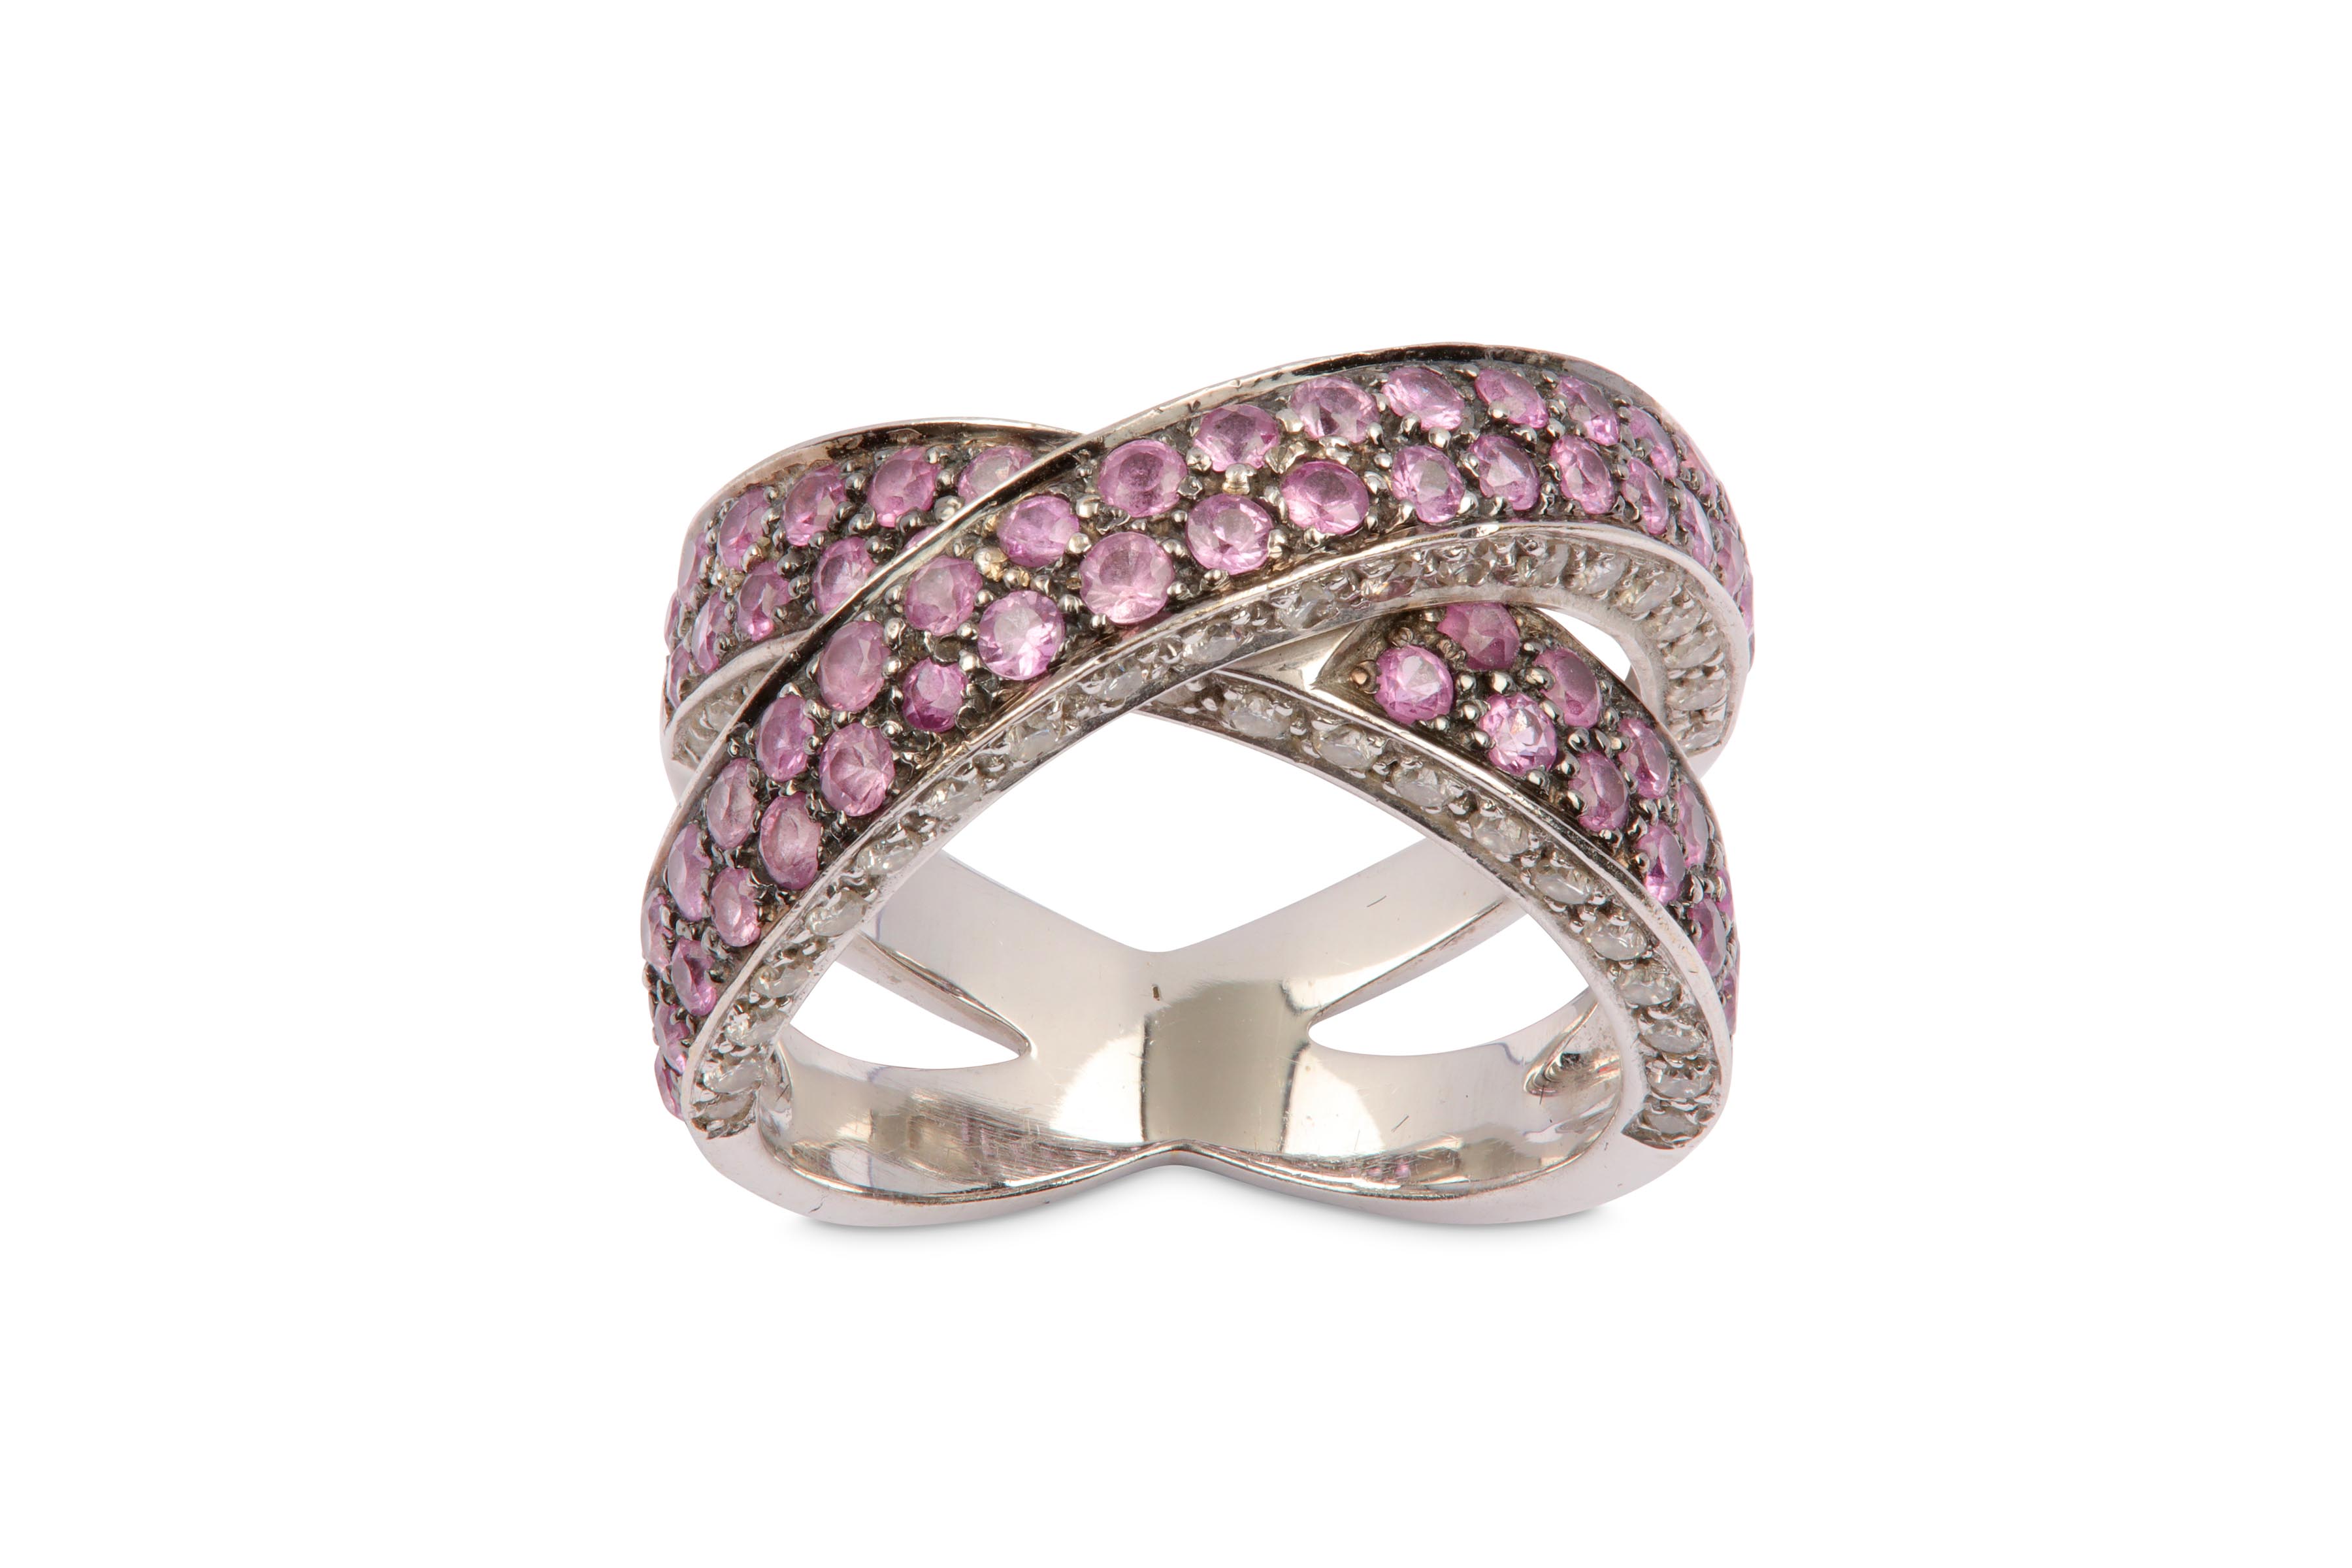 A pink sapphire and diamond crossover ring